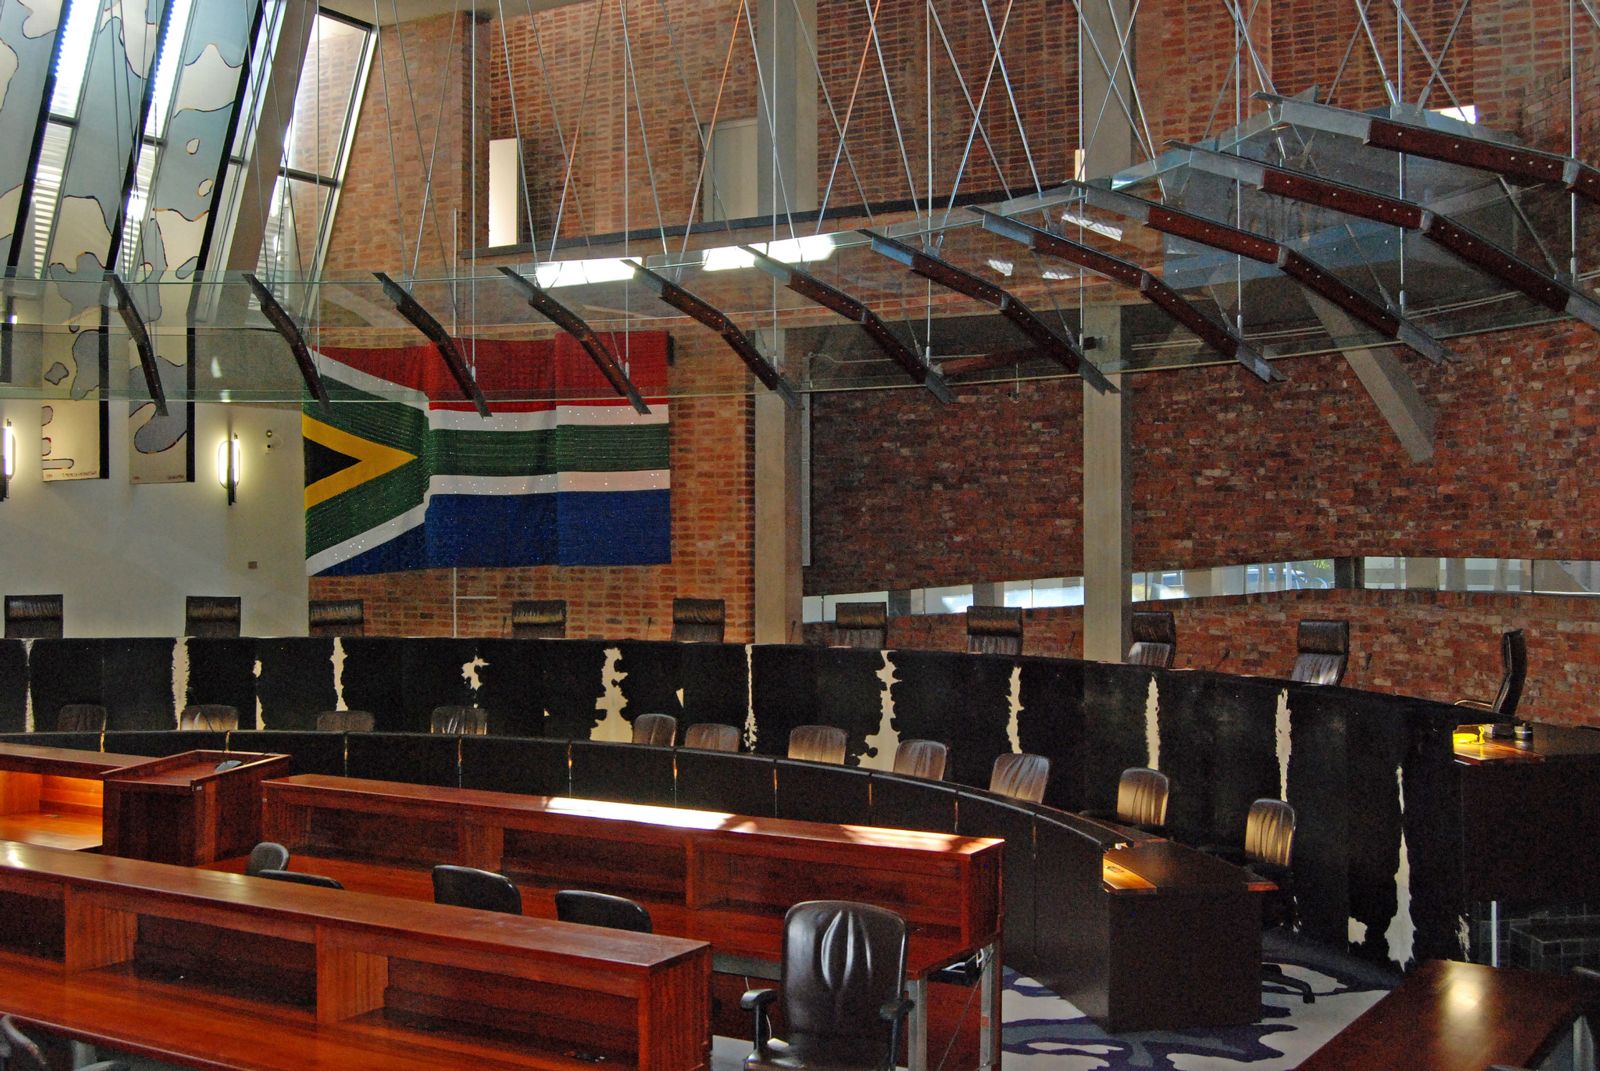 Closing the doors of justice? The South African Constitutional Court’s approach to direct access